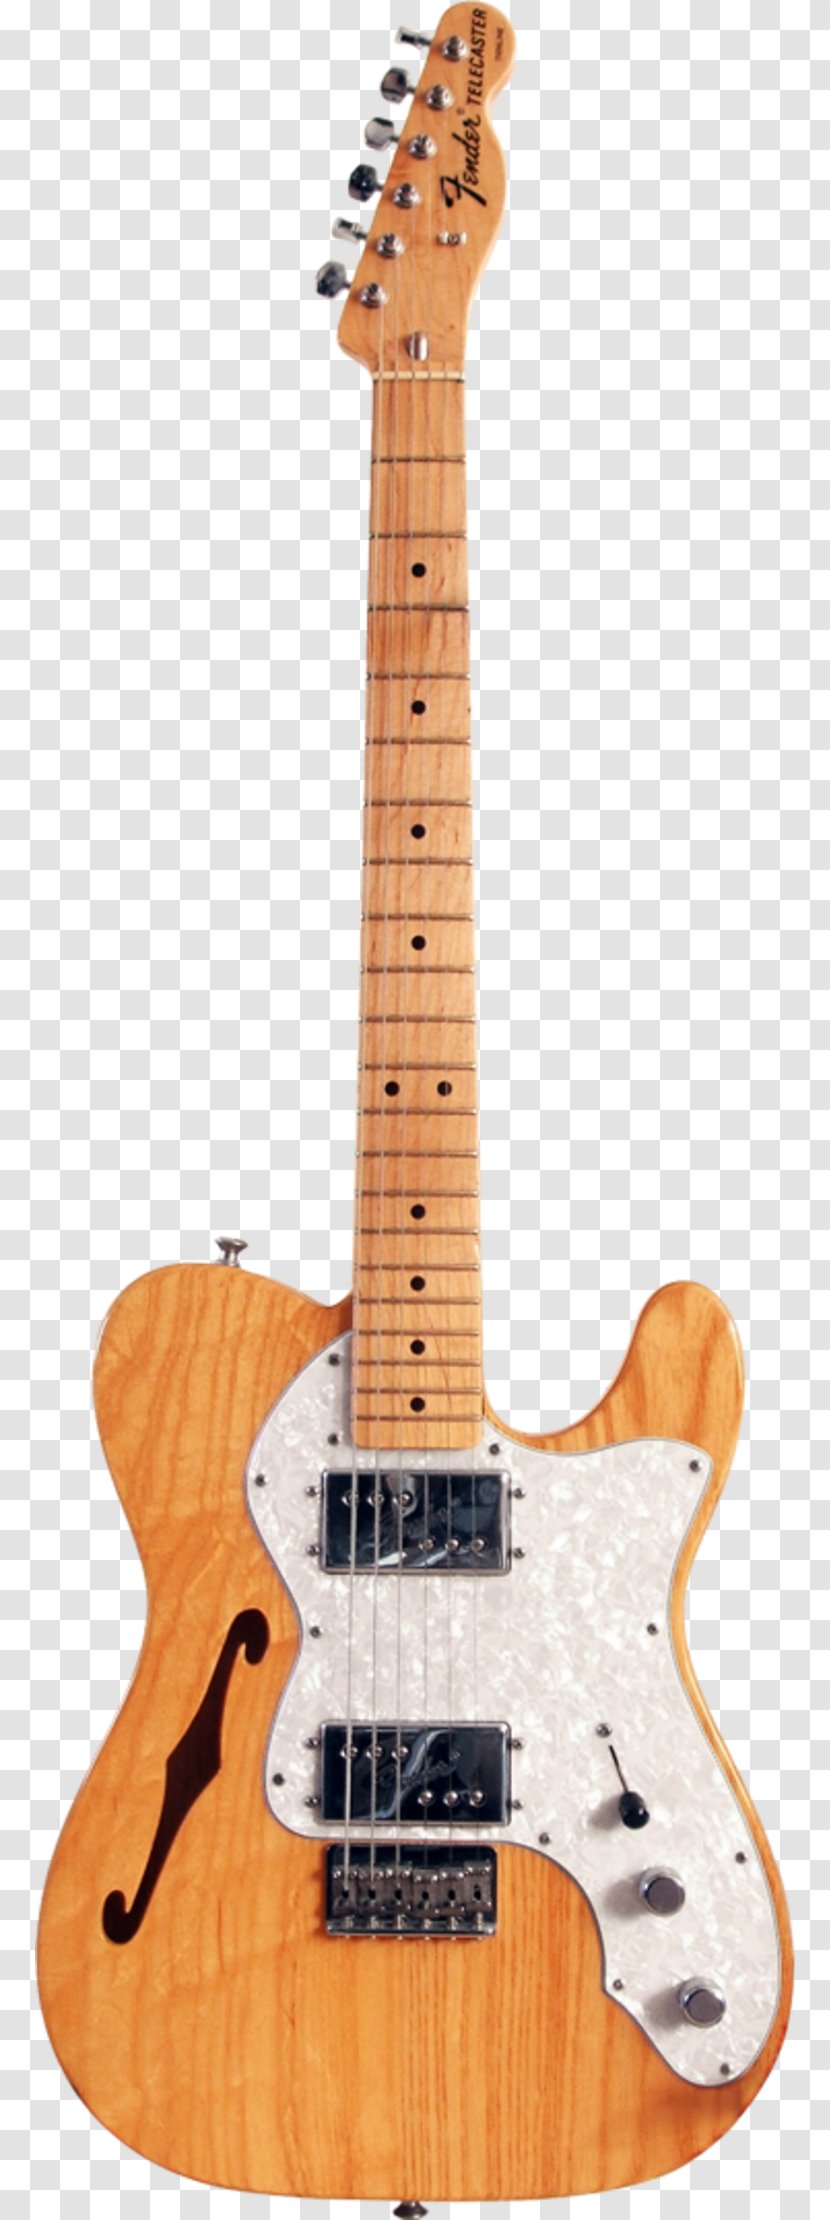 Fender Telecaster Thinline Stratocaster Deluxe Musical Instruments Corporation - Flower - Acoustic Guitar Transparent PNG